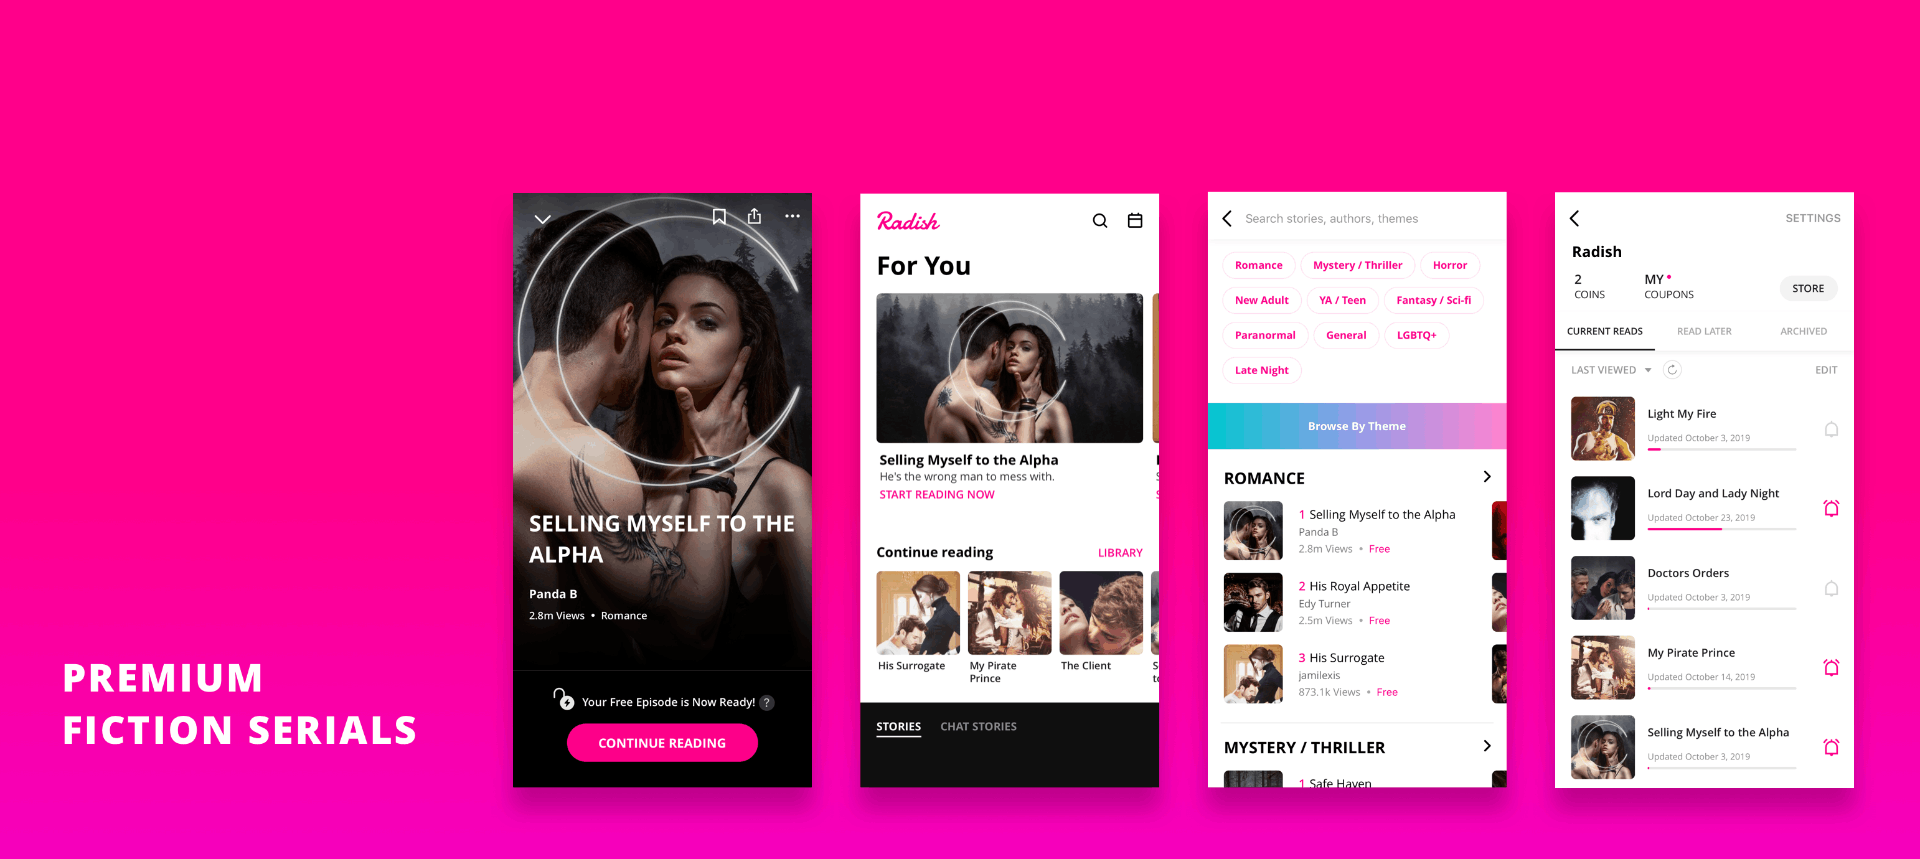 Radish Fiction App - See How to Download